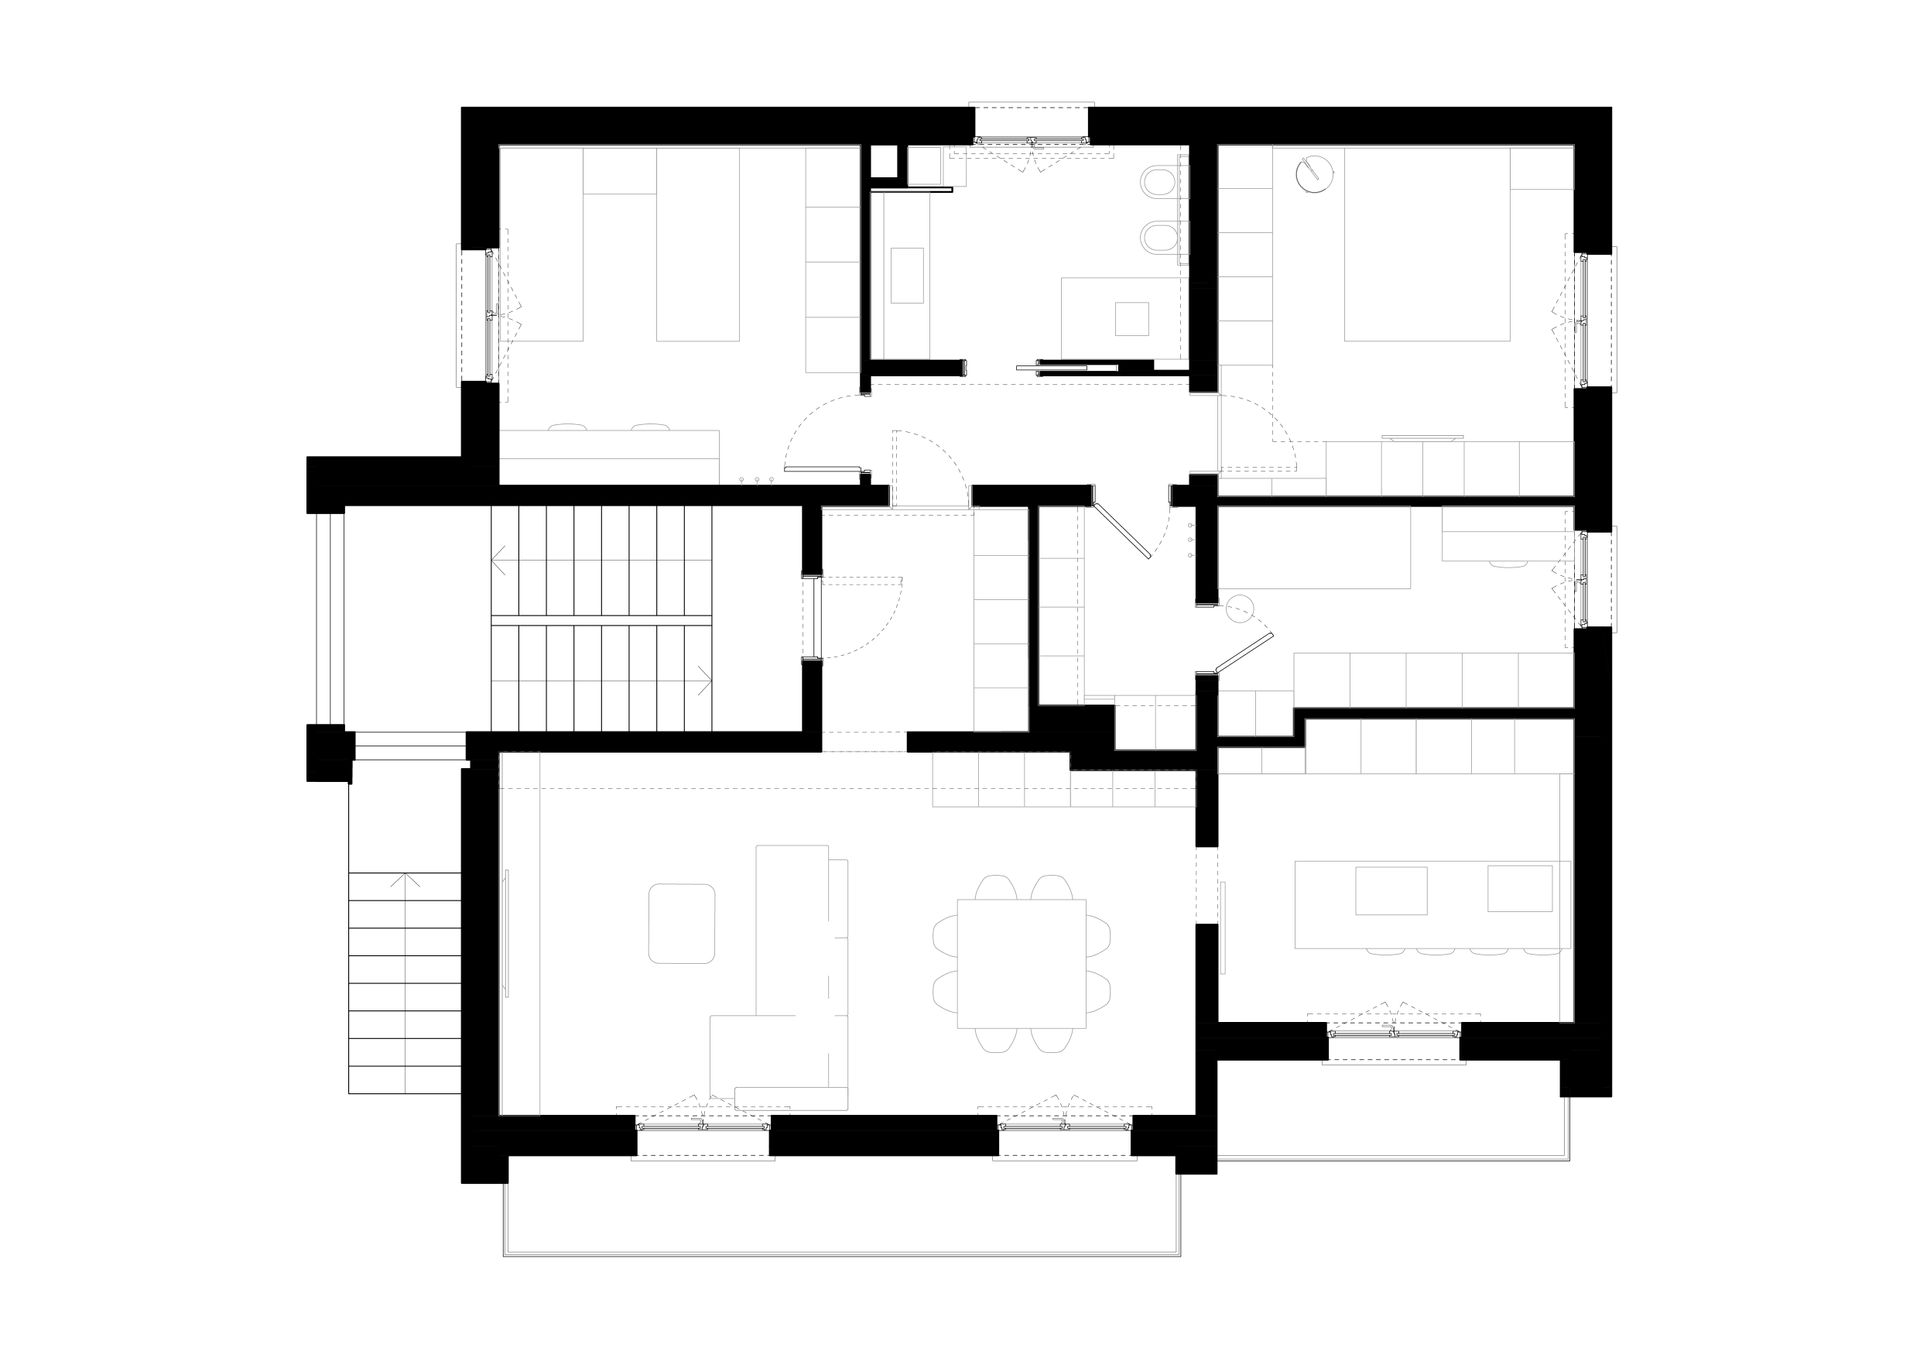 Interior design project, apartment renovation, study of spaces and surfaces, island kitchen with wood paneling. Officina Magisafi architecture design - floor plan